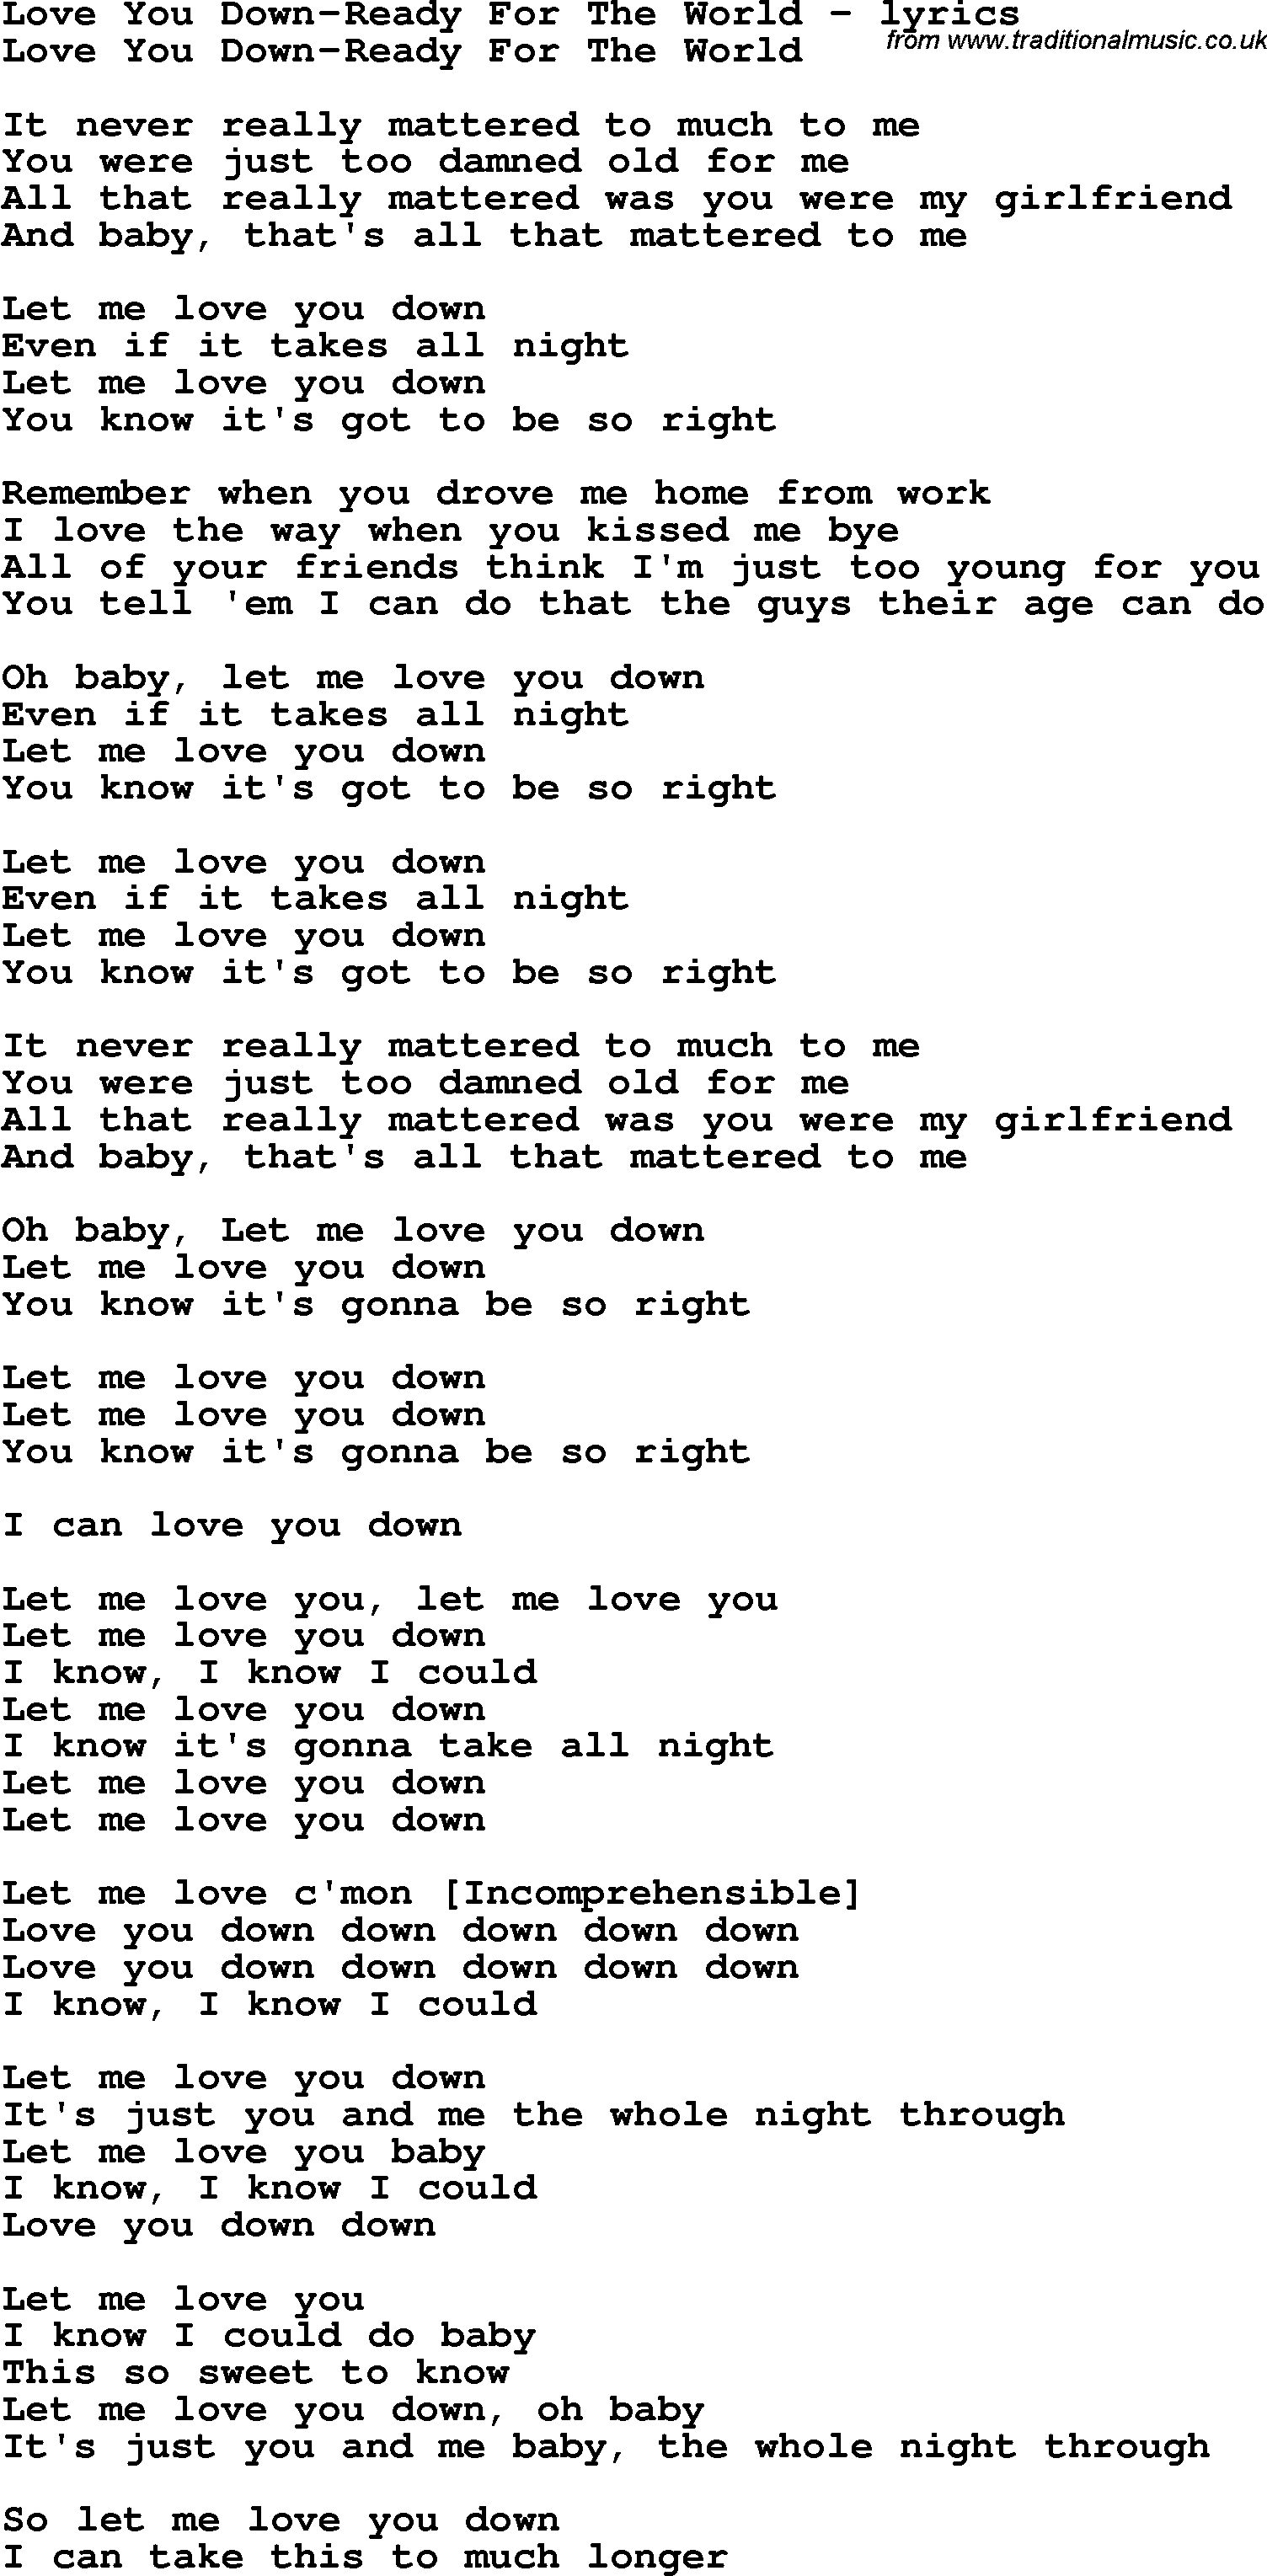 Love Song Lyrics for: Love You Down-Ready For The World